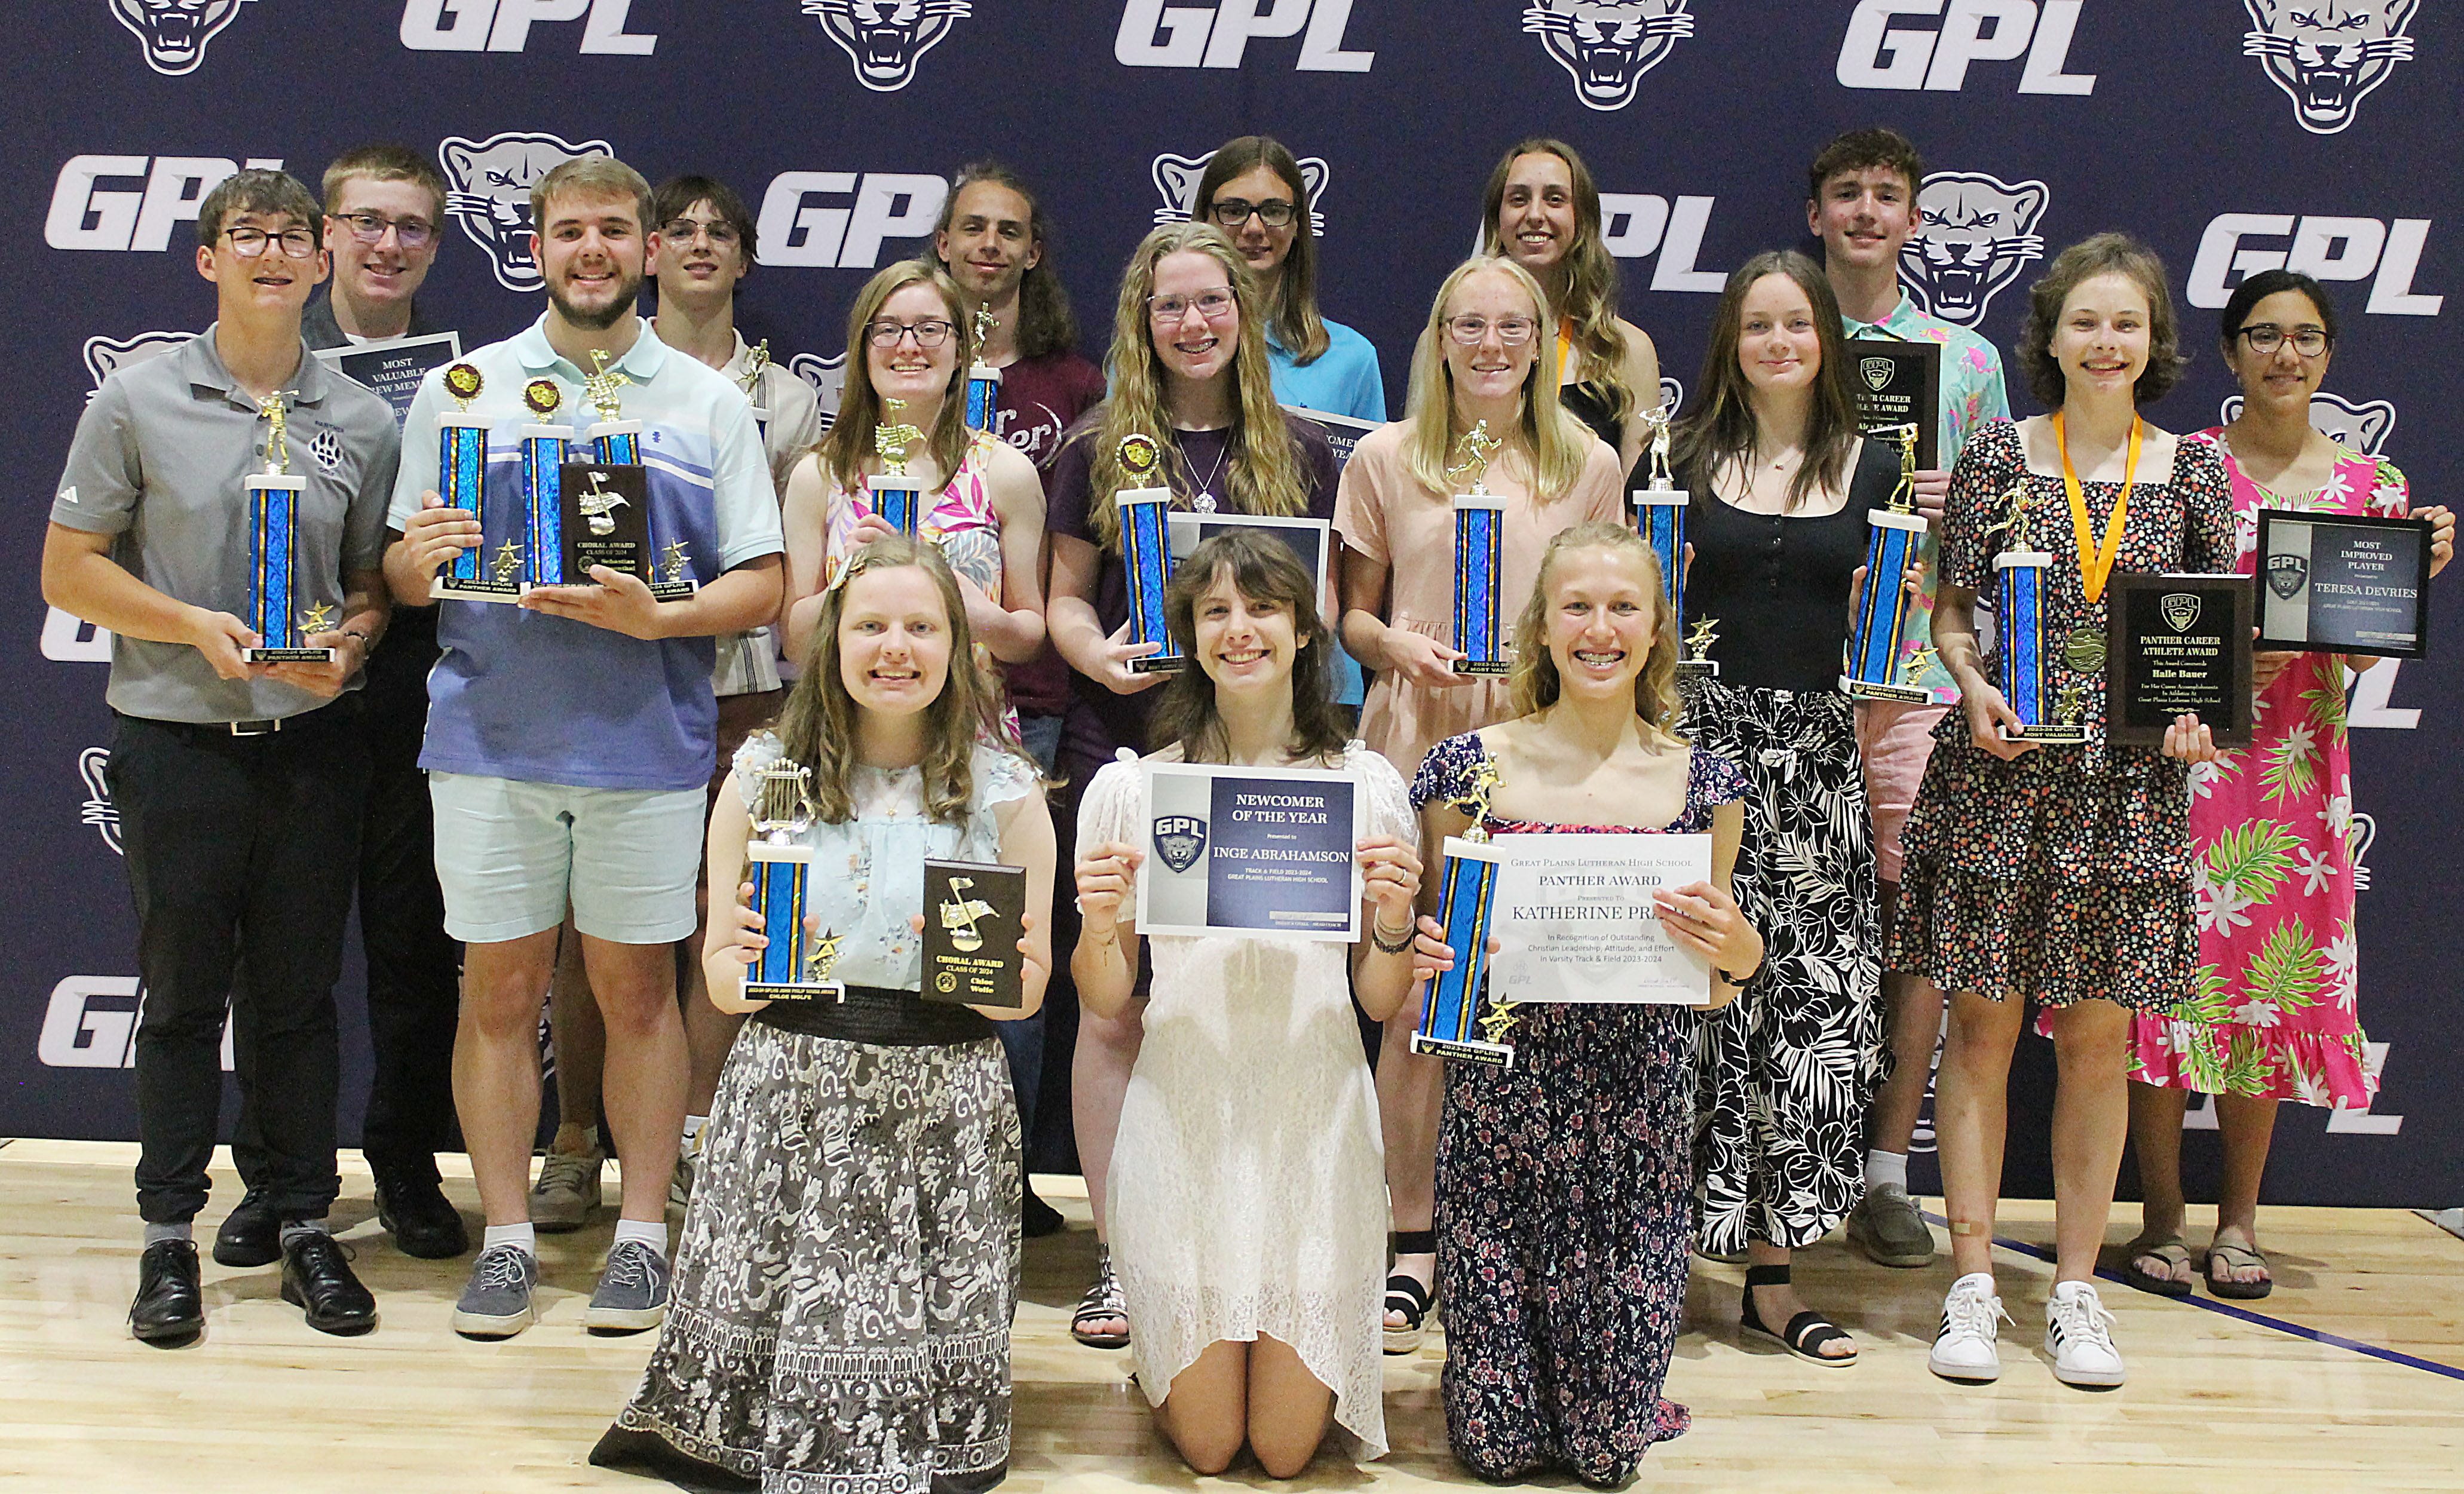 Bauer, Heil receive Career Athlete Awards at Great Plains Lutheran